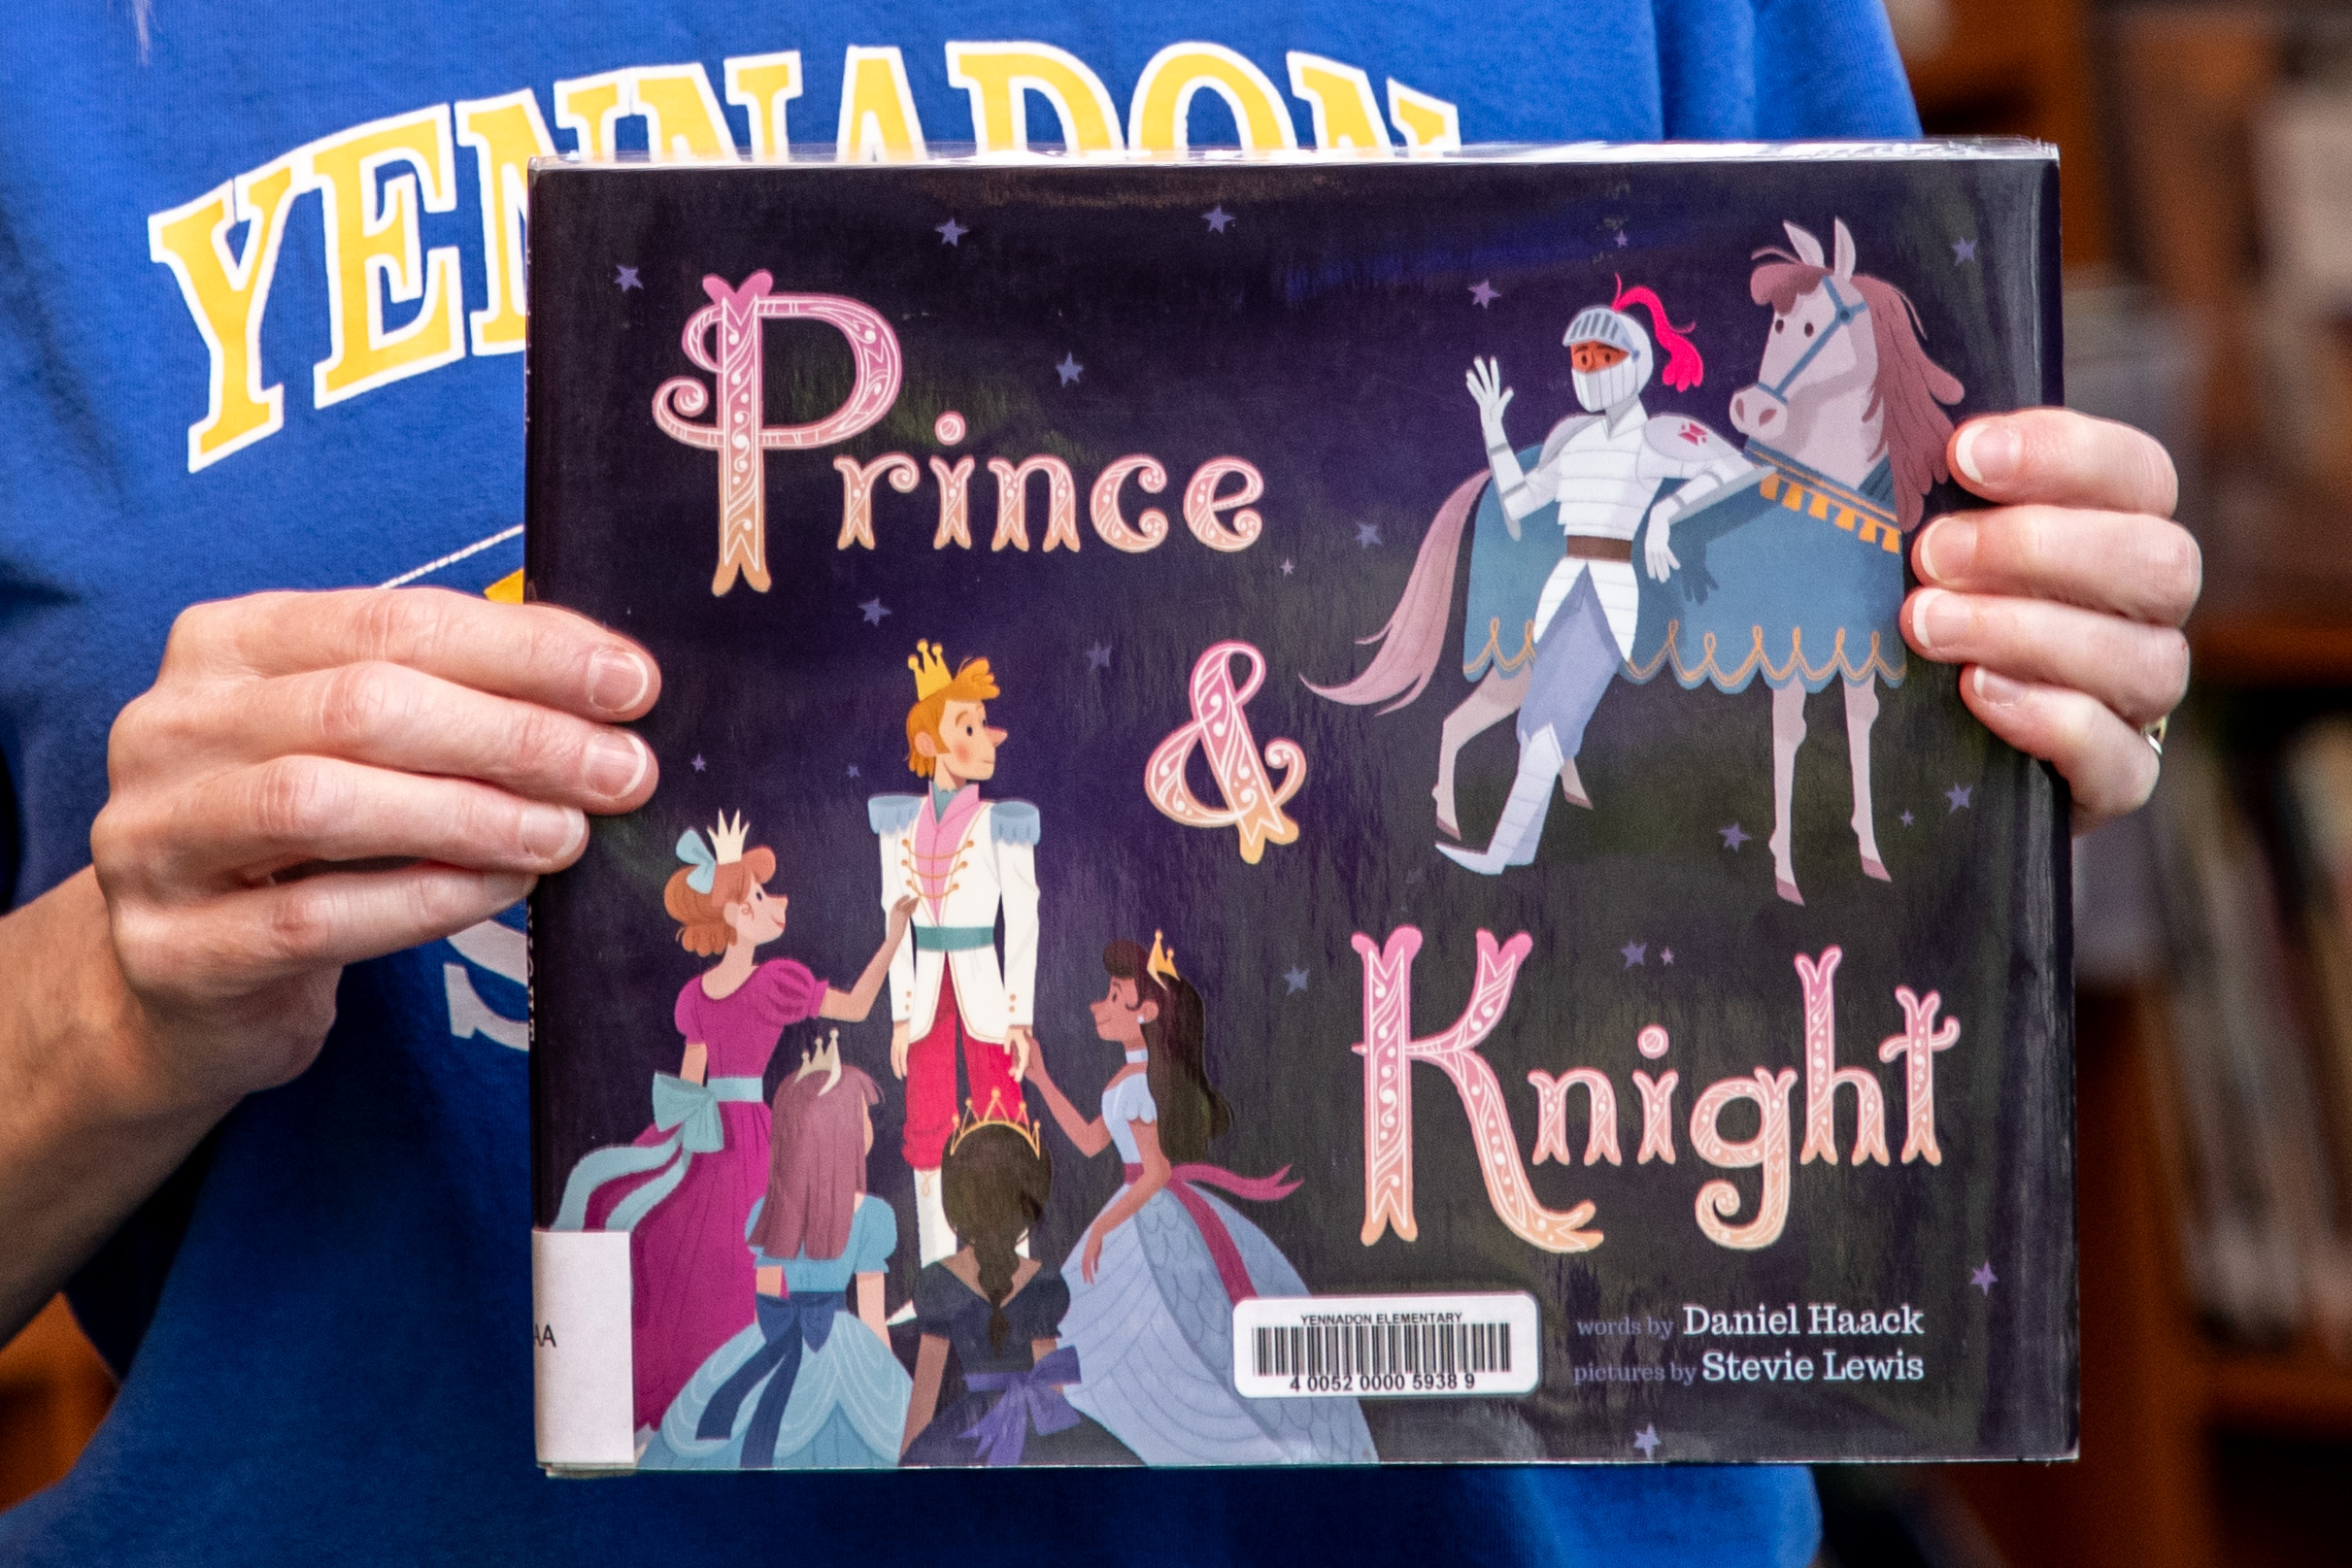 The book, "Prince & Knight," by Daniel Haack.